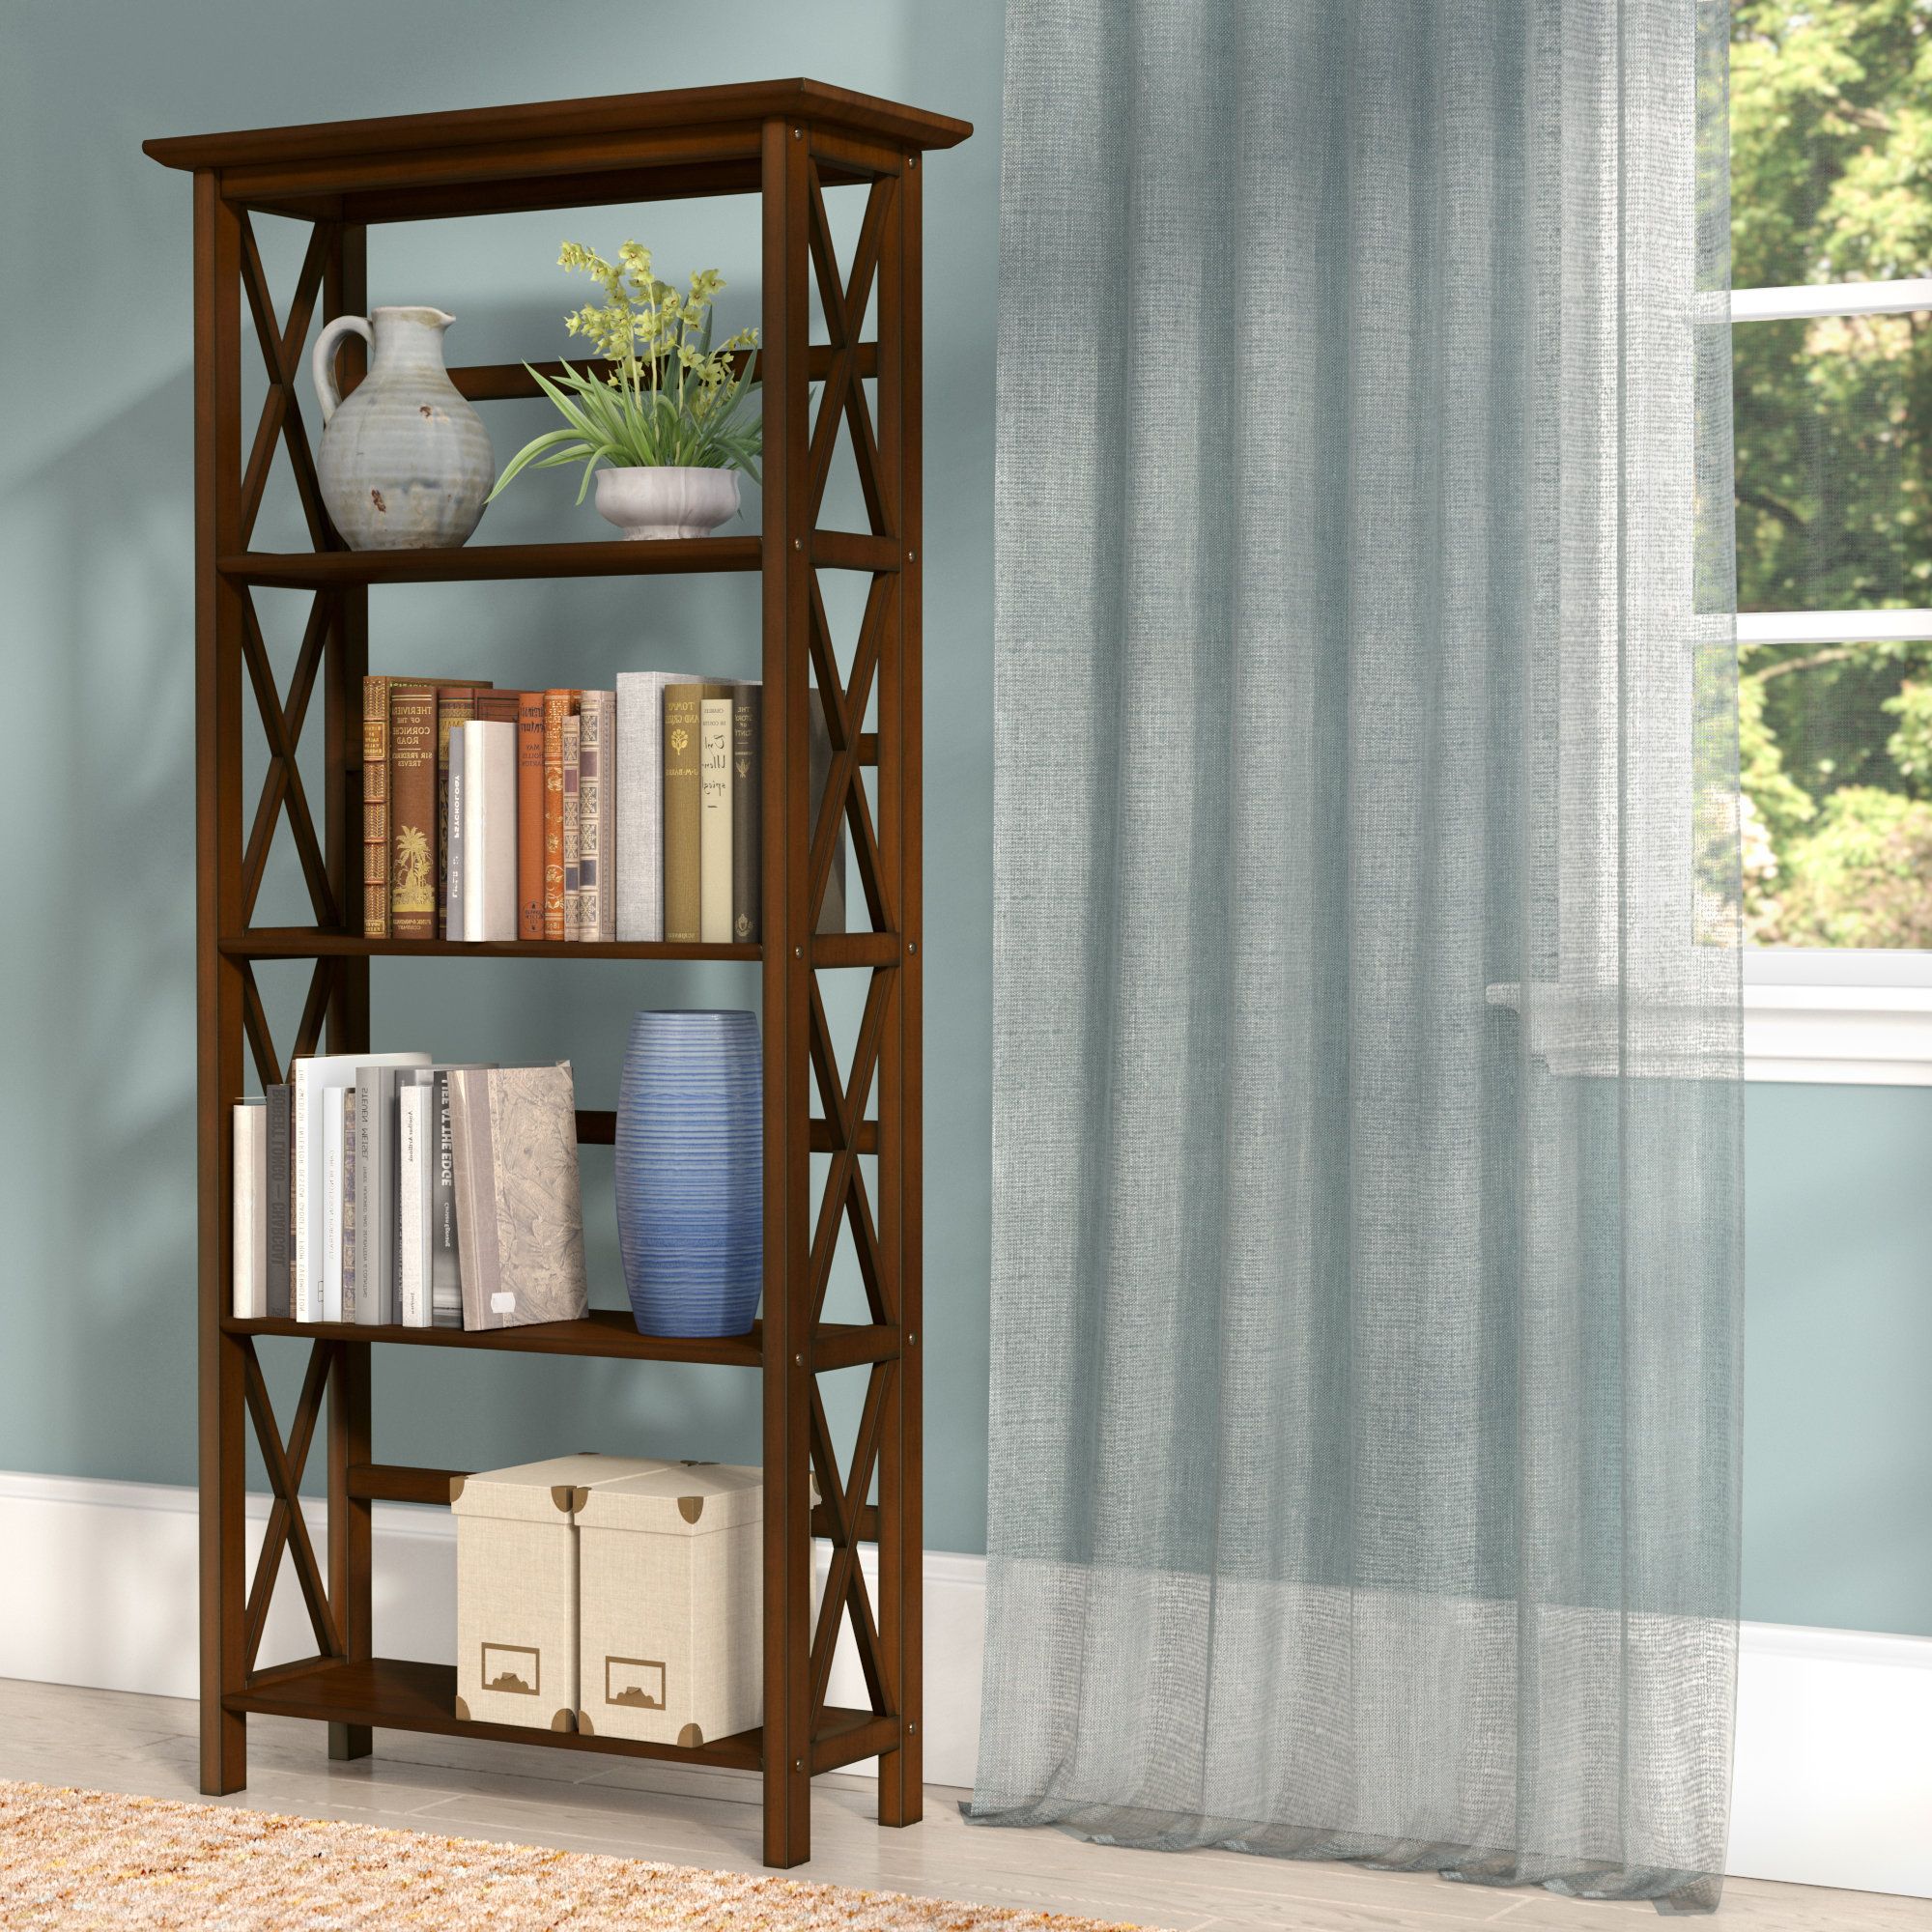 Most Recently Released Hitz Etagere Bookcases Within Hitz Etagere Bookcase (View 1 of 20)